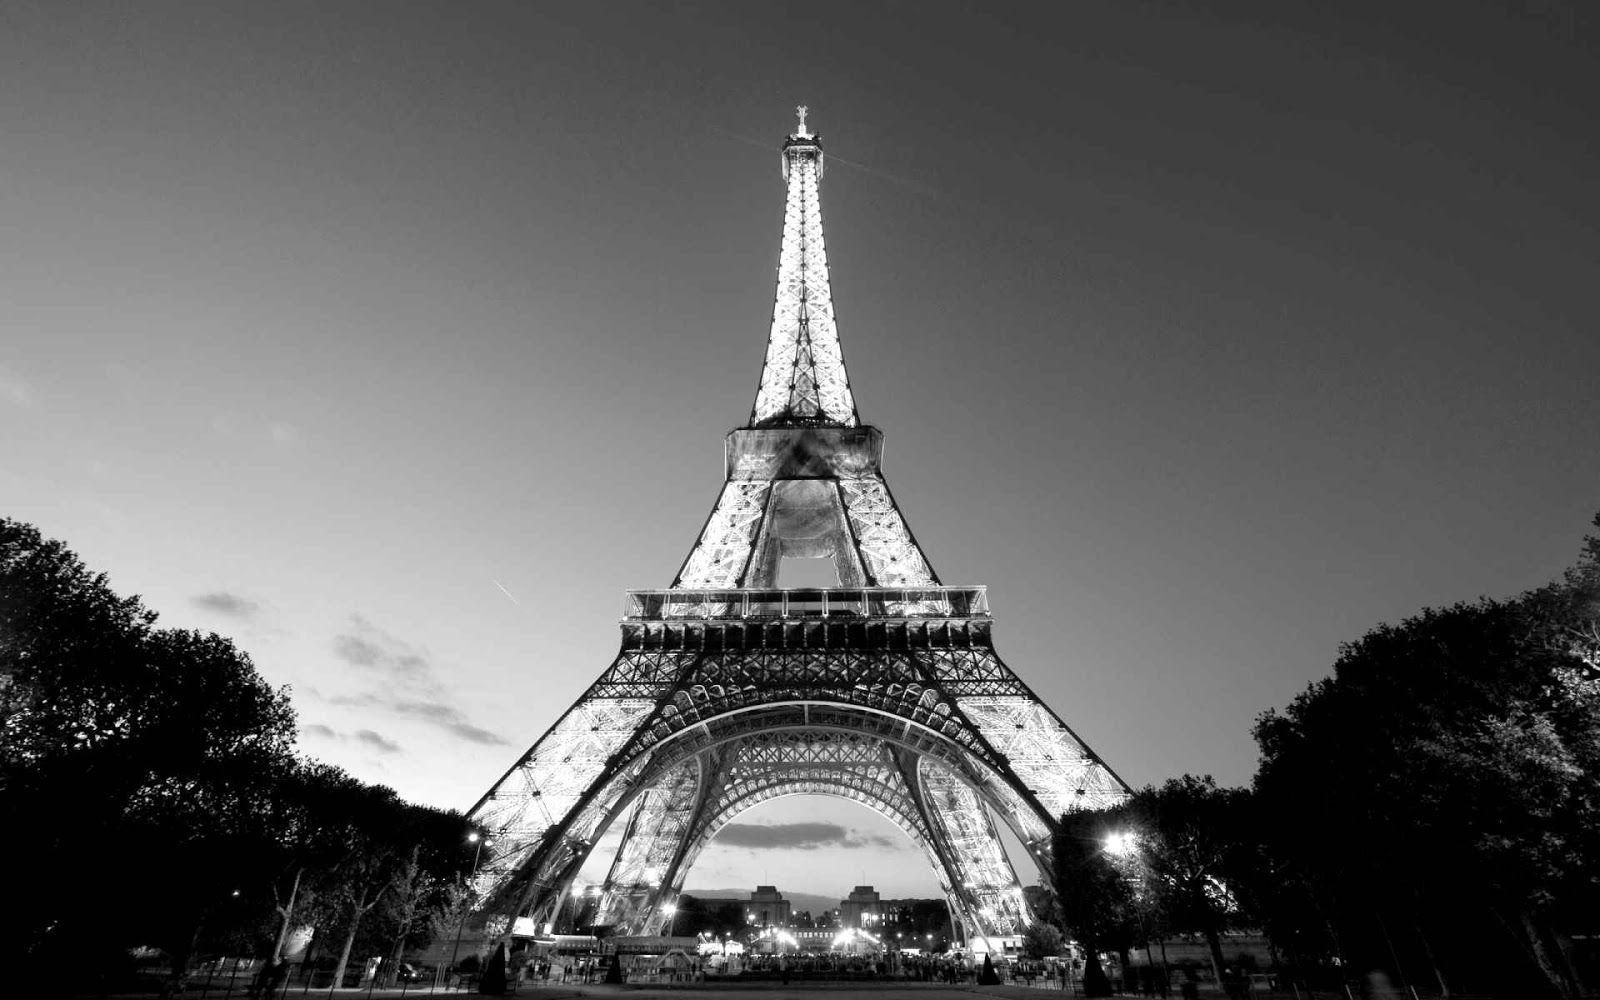 Best Black And White Photo. Eiffel Tower Paris Black And White